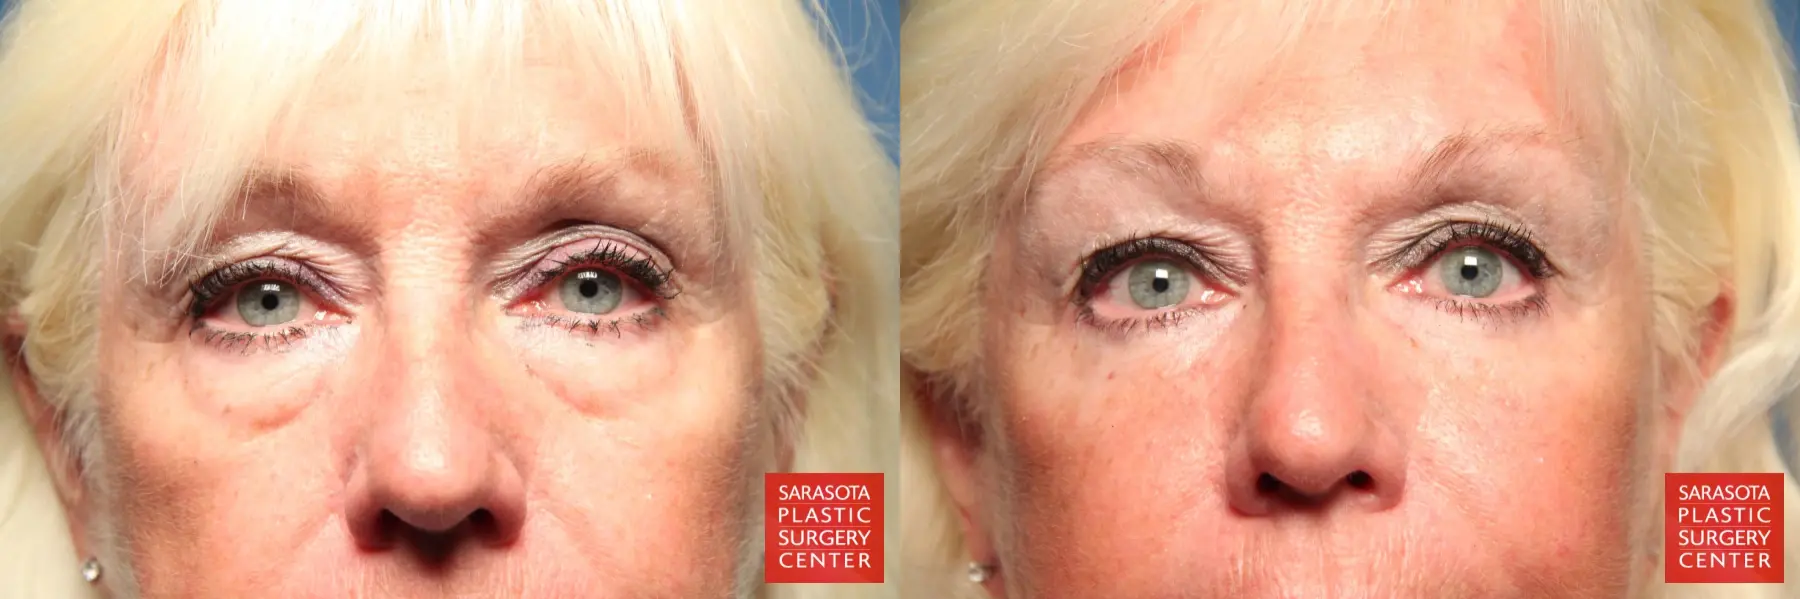 Eyelid Surgery: Patient 1 - Before and After  